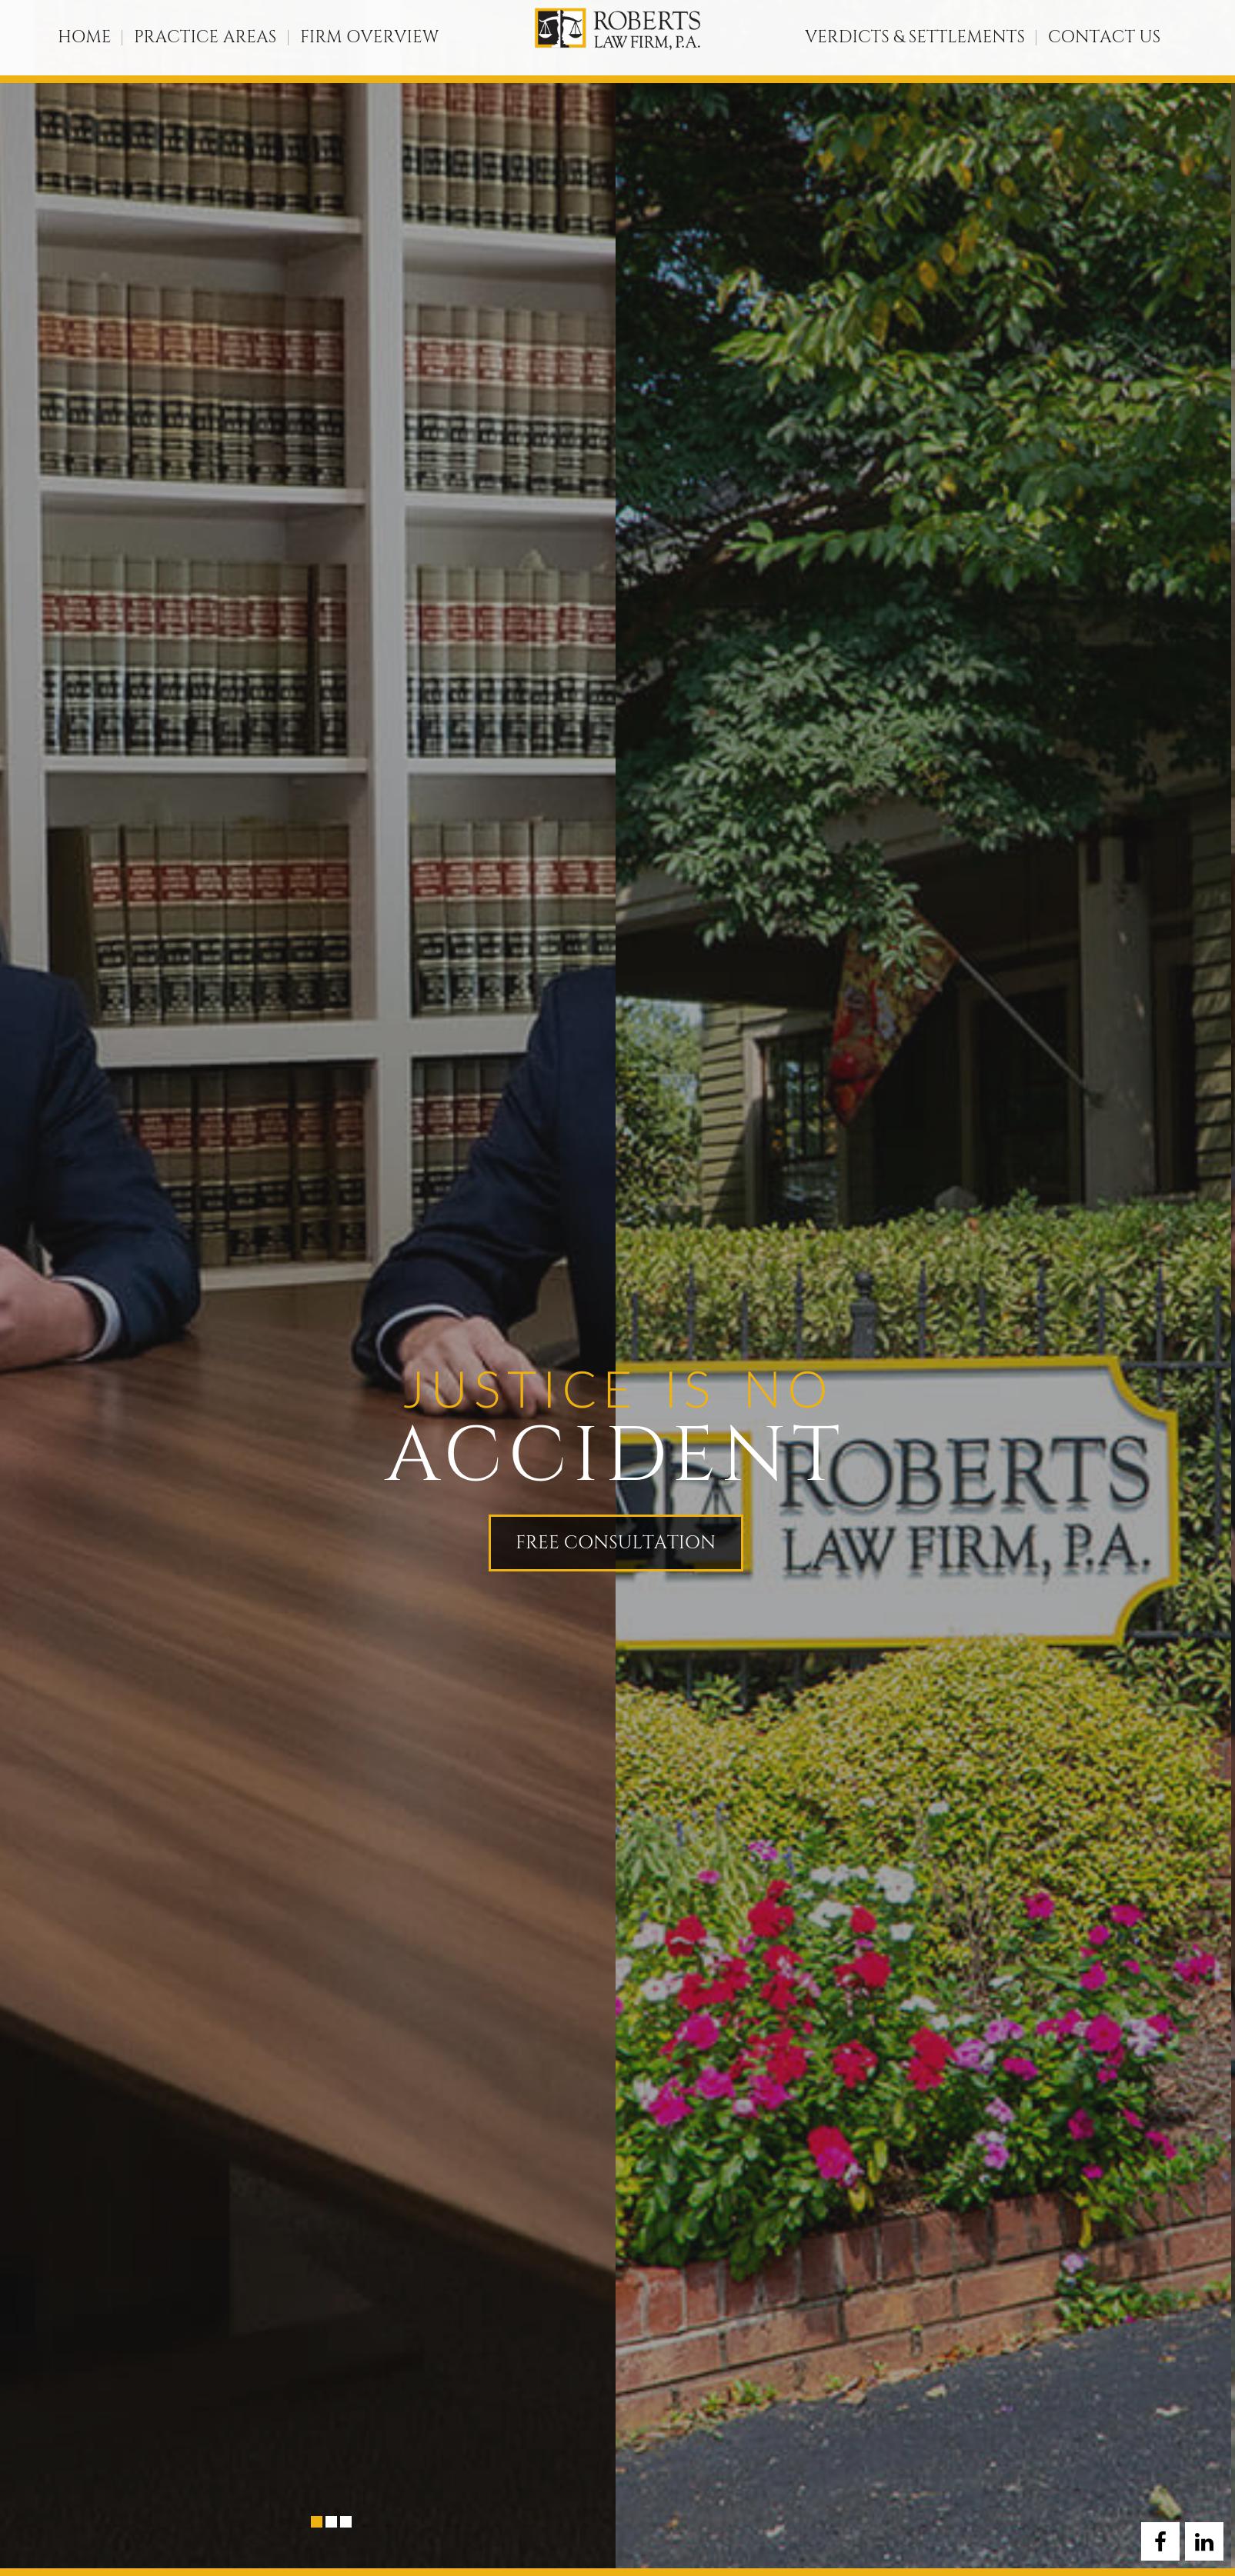 The Roberts Law Firm, P.A. - Gastonia NC Lawyers